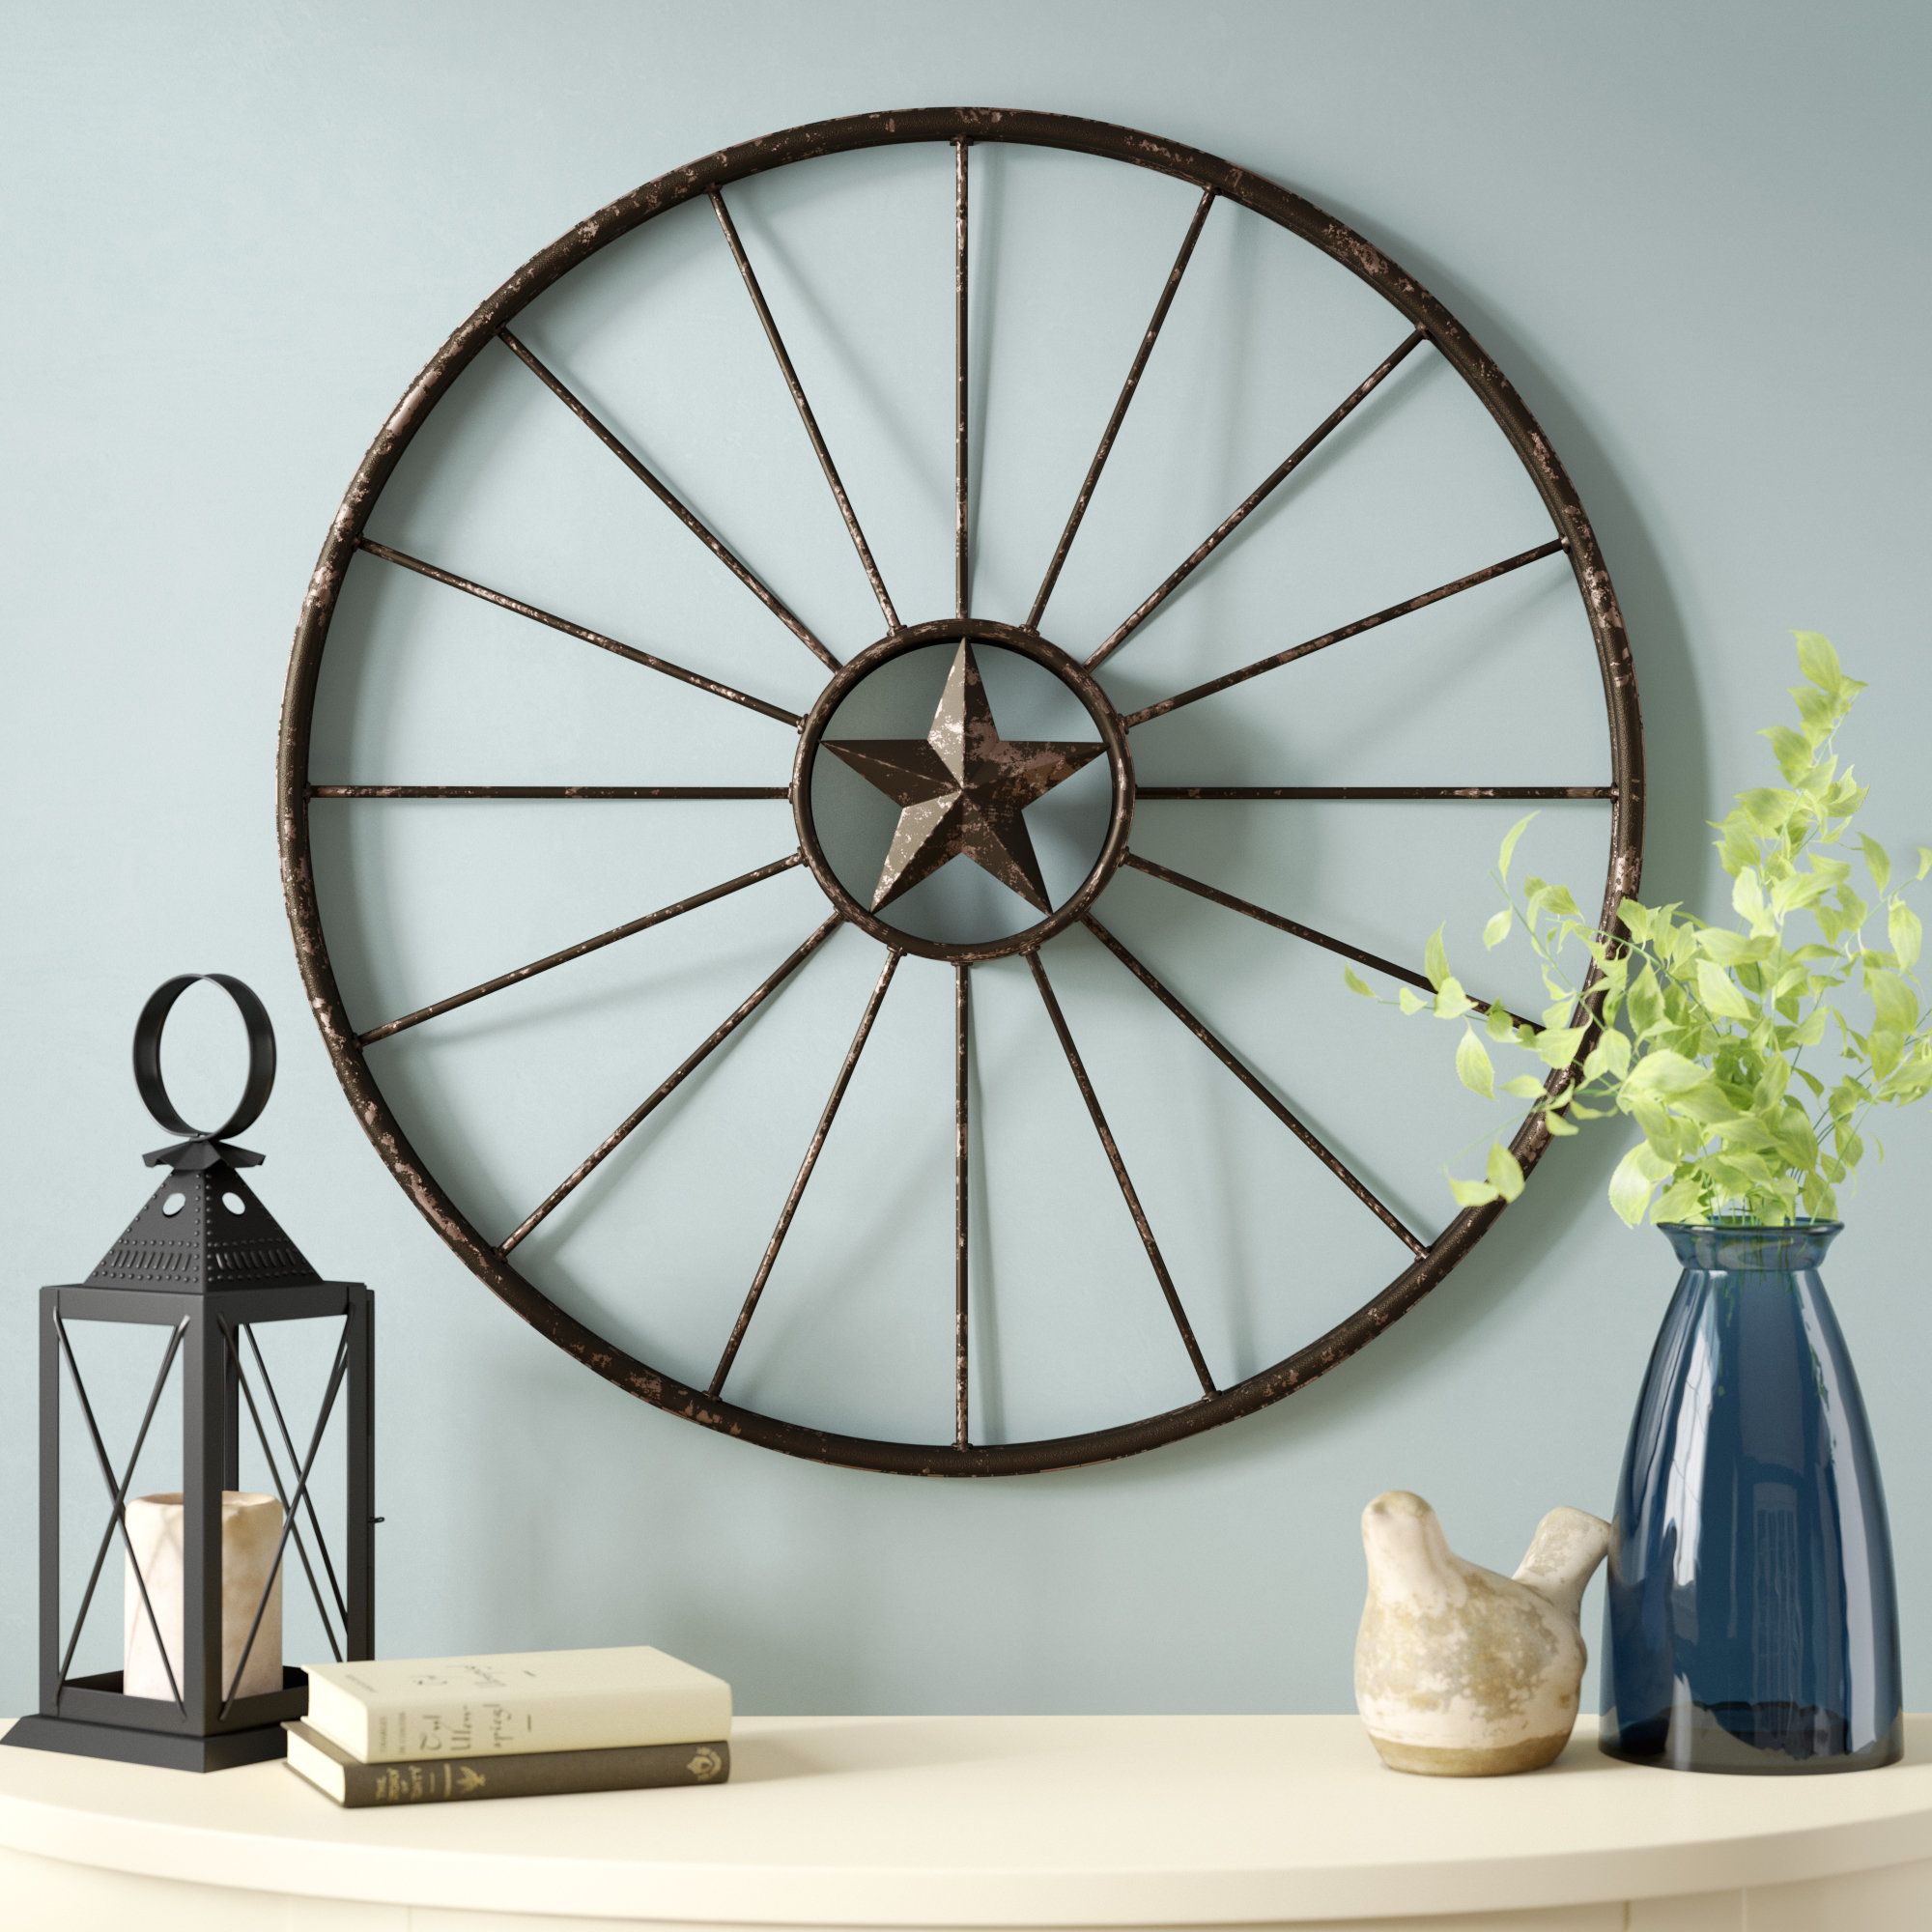 Bike Wheel Wall Decor | Wayfair Intended For Bike Wall Decor By August Grove (View 27 of 30)